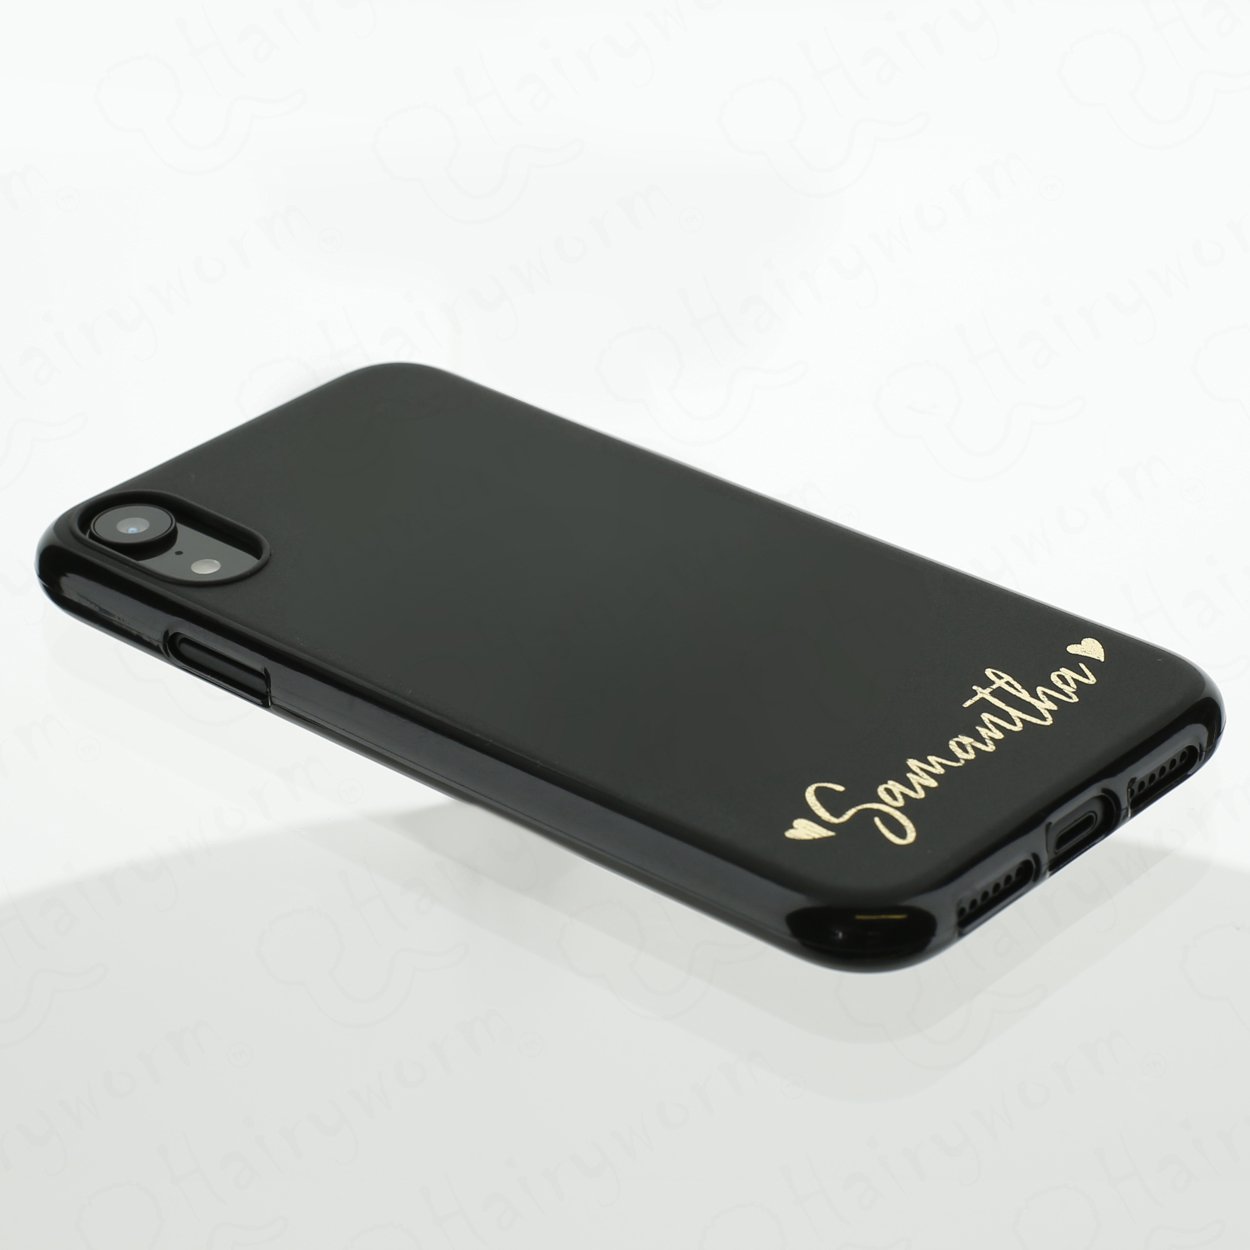 Personalised LG Phone Gel Case with Classic Initials Under a Large Crown